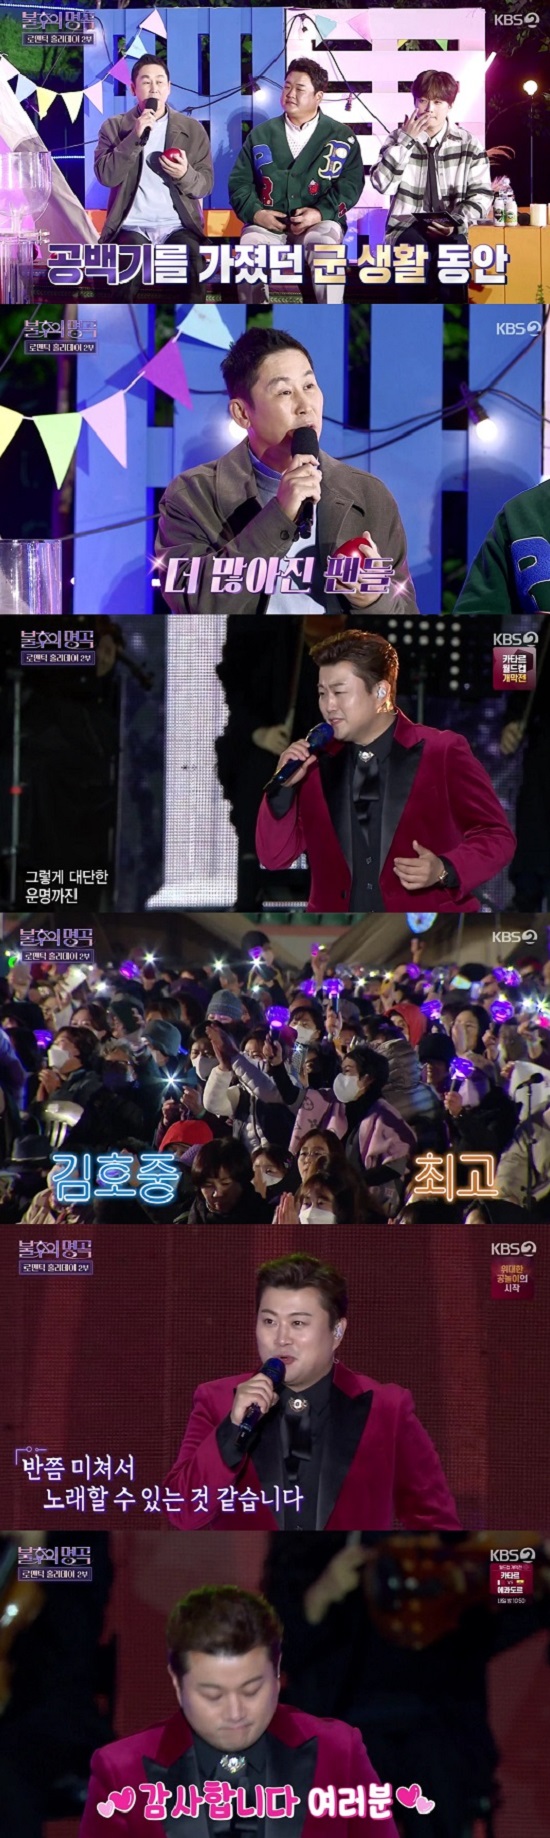 Immortal Songs: Singing the Legend Kim Ho-joong has thanked fans for their cheers.The 581th episode of KBS 2TVs Immortal Songs: Singing the Legend, which aired on the 19th, was decorated with two special episodes of Romantic Holiday 2022.On this day, vocalists such as Spider, Had Dong Kyun, Minnabi, Jo Sung-mo, Bobby kim, Big Mama Lee Young-hyun, Hwang Chi-yeol and Kim Ho-joong sang romantic songs and breathed into the audience.Shin Dong-yup said, He is called the best vocalist in the world, he said. I am doing an All states tour concert for the 20th anniversary of my debut. I am very much loved by many people and I am doing well.Spider went on stage and said, I have to sing a song that is as good as you have been waiting for a long time, but I think this song will be the most impressive. I will tell you a song that is a sad song but I do not know why.Spider, who showed his first stage, asked the audience, Do you have anything you want to hear while preparing for the next stage?One audience recommended the song I was going to be a friend, and Spider was impressed by the unaccompanied enthusiasm for the fans.In the meantime, Spider said, Are you there again? And When you come back, the song was also unaccompanied. The second stage was You Are My Everything stage.Since then, Shin Dong-yup has introduced Kim Ho-joong, saying, I know that this is also a great love for fans, as well as others.I know that he also has a great love for his fans, as well as other people, he added. Its very unusual for him to have a hiatus while serving in the military, and hes said hes had more fans in the meantime.He added, I am working hard for fans such as releasing the album after releasing the album to give back to the love and the All states tour concert.On stage, Kim Ho-joong performed Shim Su-bongs One Million Roses. The audience cheered with shouts and applause.Kim Ho-joong said, I think Im actually half crazy because of your shouting and applause. Im so grateful. We met each other, and Im going to sing Meet You Among Them. Thank you so much.Kim Ho-joong showed his sincerity toward the fans by singing Lee Sun-hees Meet you in the middle song.After the stage was over, the audience applauded and cheered, and Kim Ho-joong was impressed.Meanwhile, Immortal Songs: Singing the Legend is broadcast every Saturday at 6:10 pm.Picture: KBS 2TV broadcast screen